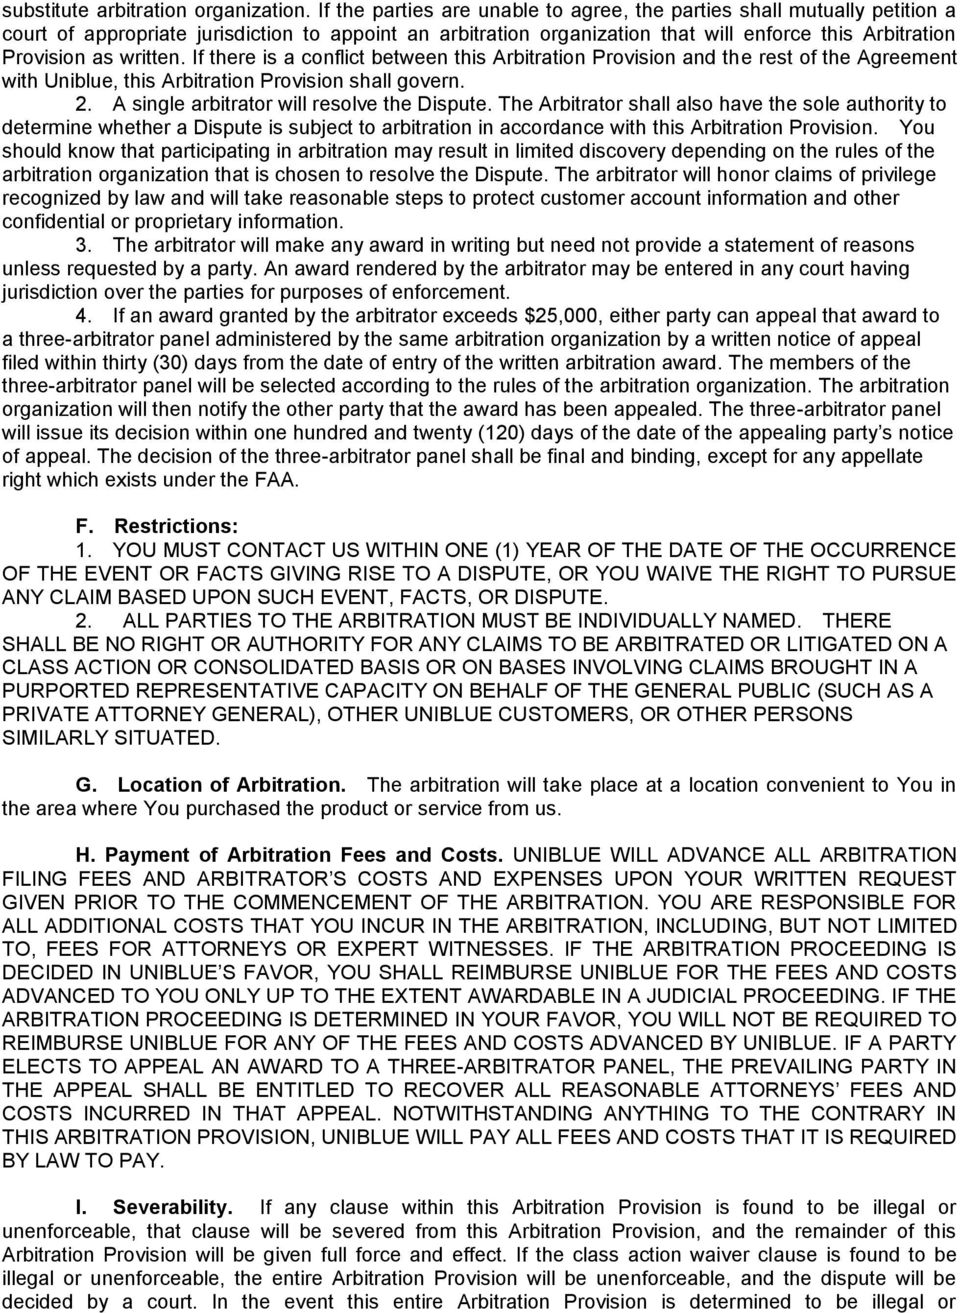 written. If there is a conflict between this Arbitration Provision and the rest of the Agreement with Uniblue, this Arbitration Provision shall govern. 2. A single arbitrator will resolve the Dispute.